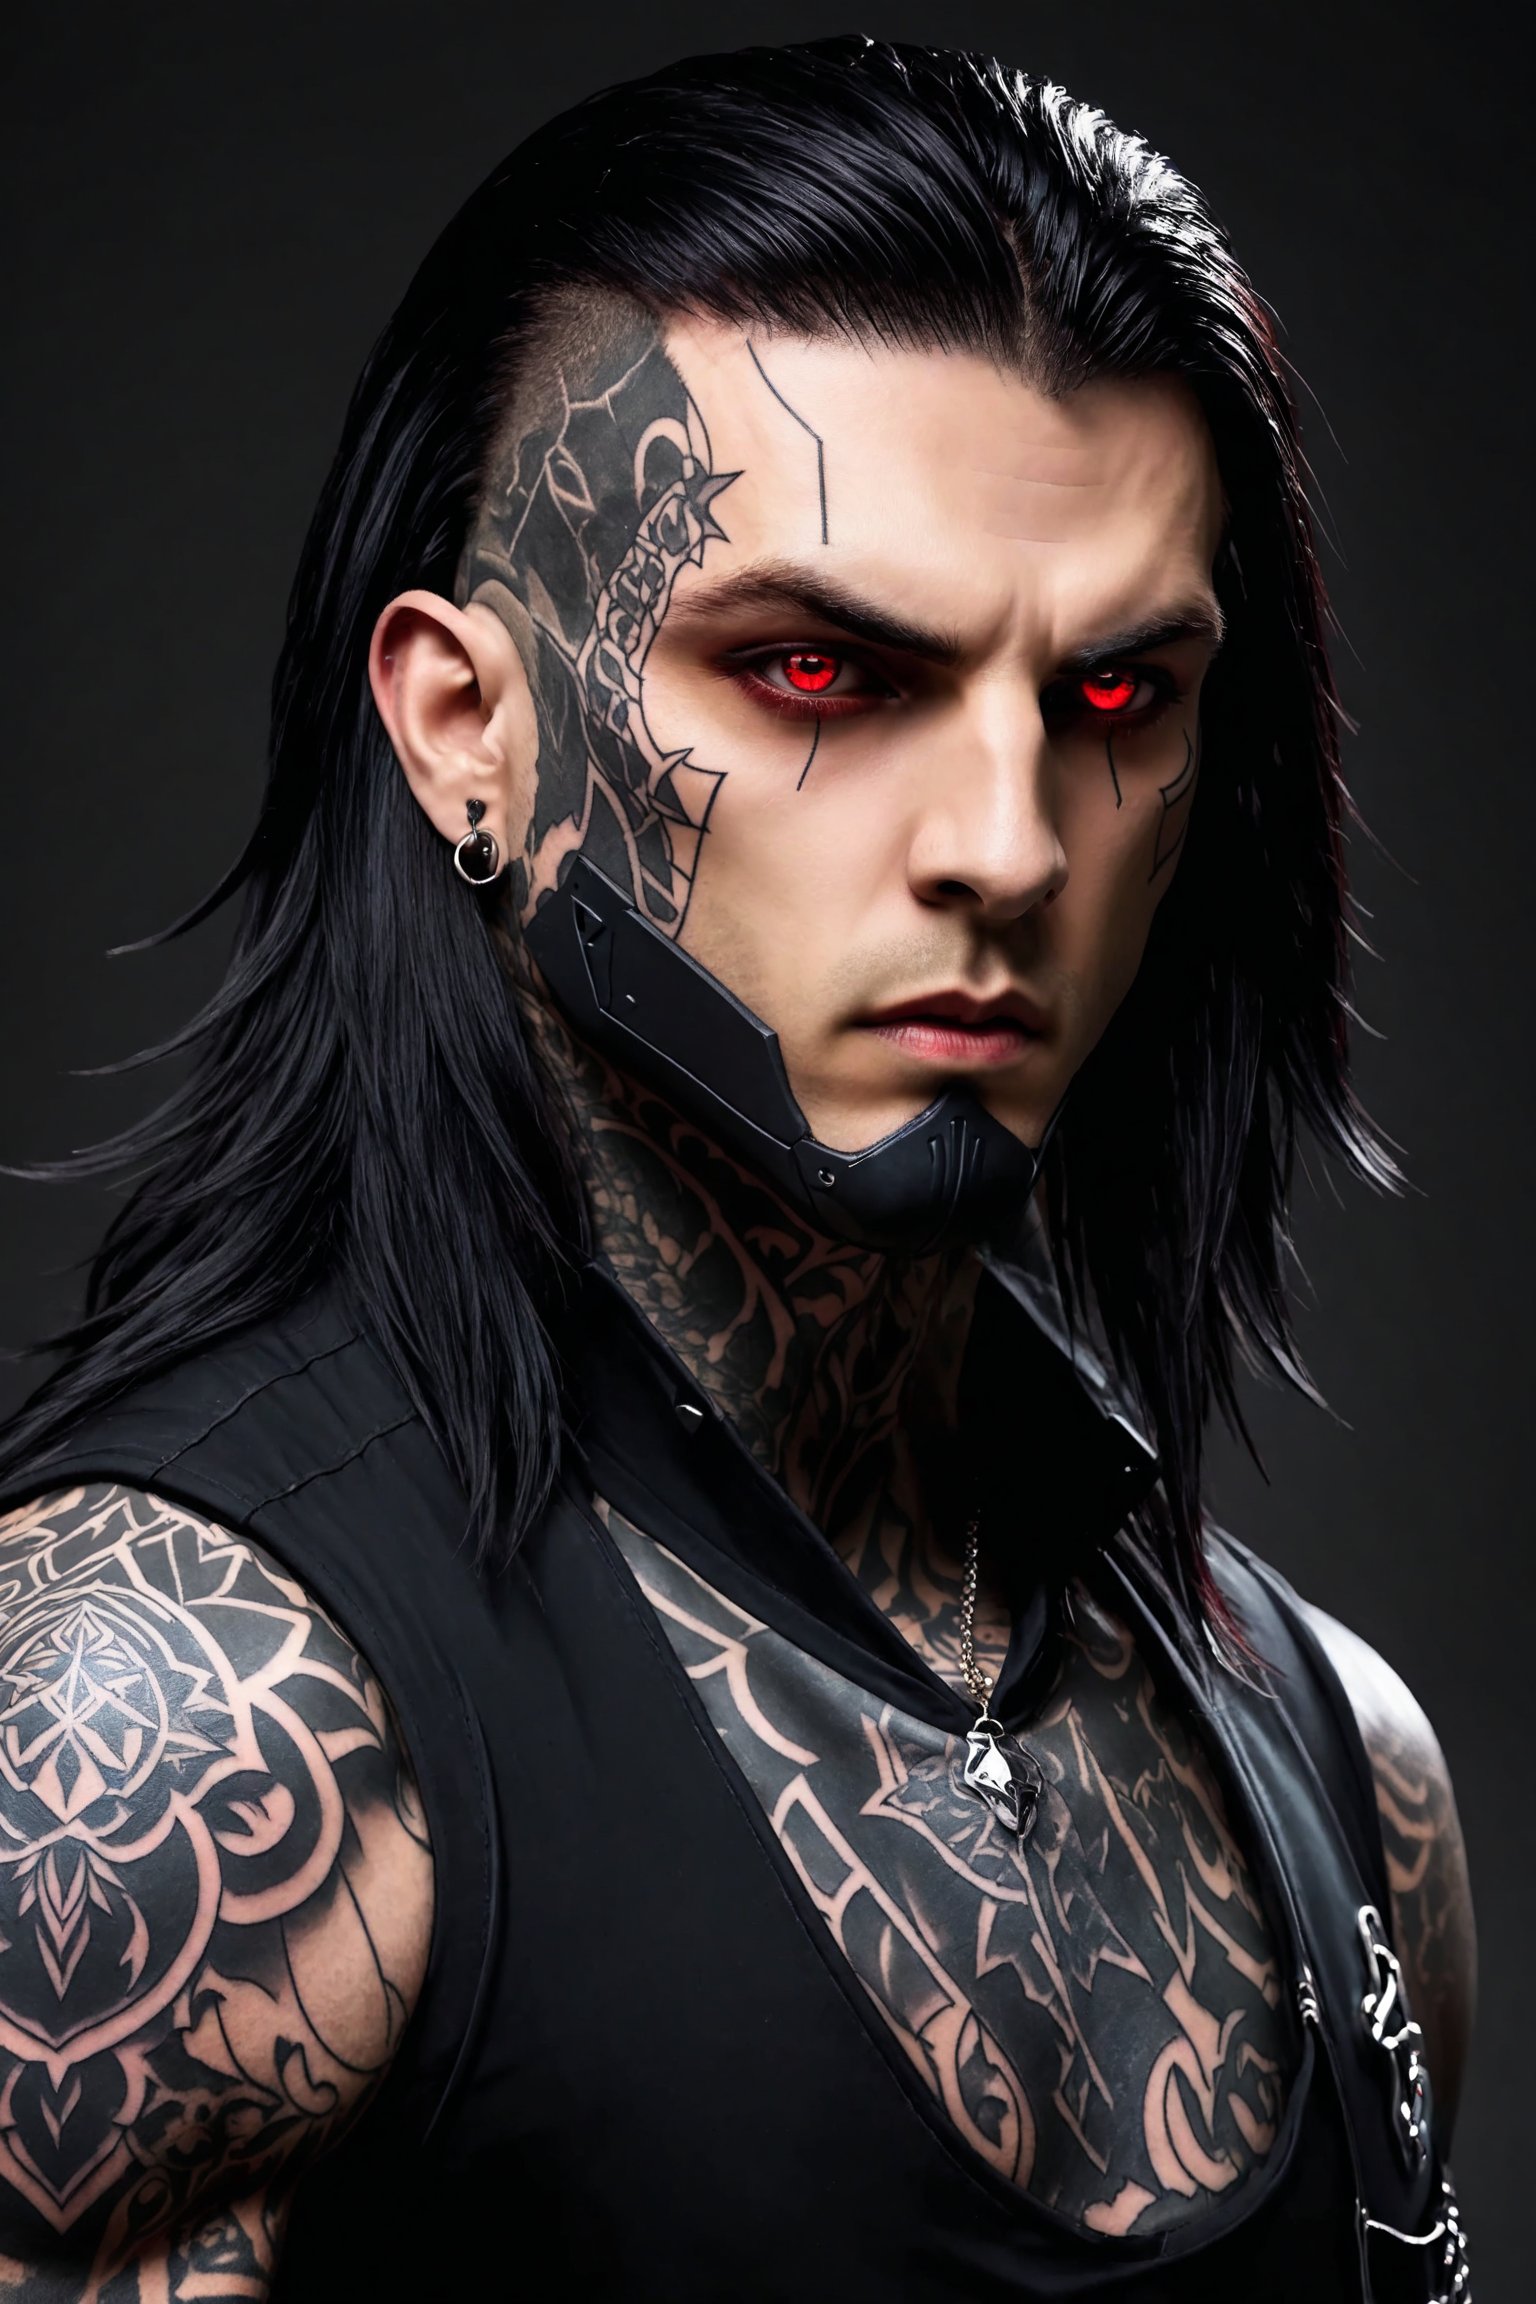 Antagonist Design,1 man,badass man,
Ronnie Radke,
long hair,((tattoo on forehead:1.2)),
A vampire with a beautiful and cool design, ominous red eyes, sickly fair skin, and sharp black armor.,zavy-cbrpn,Watch the World Burn,

